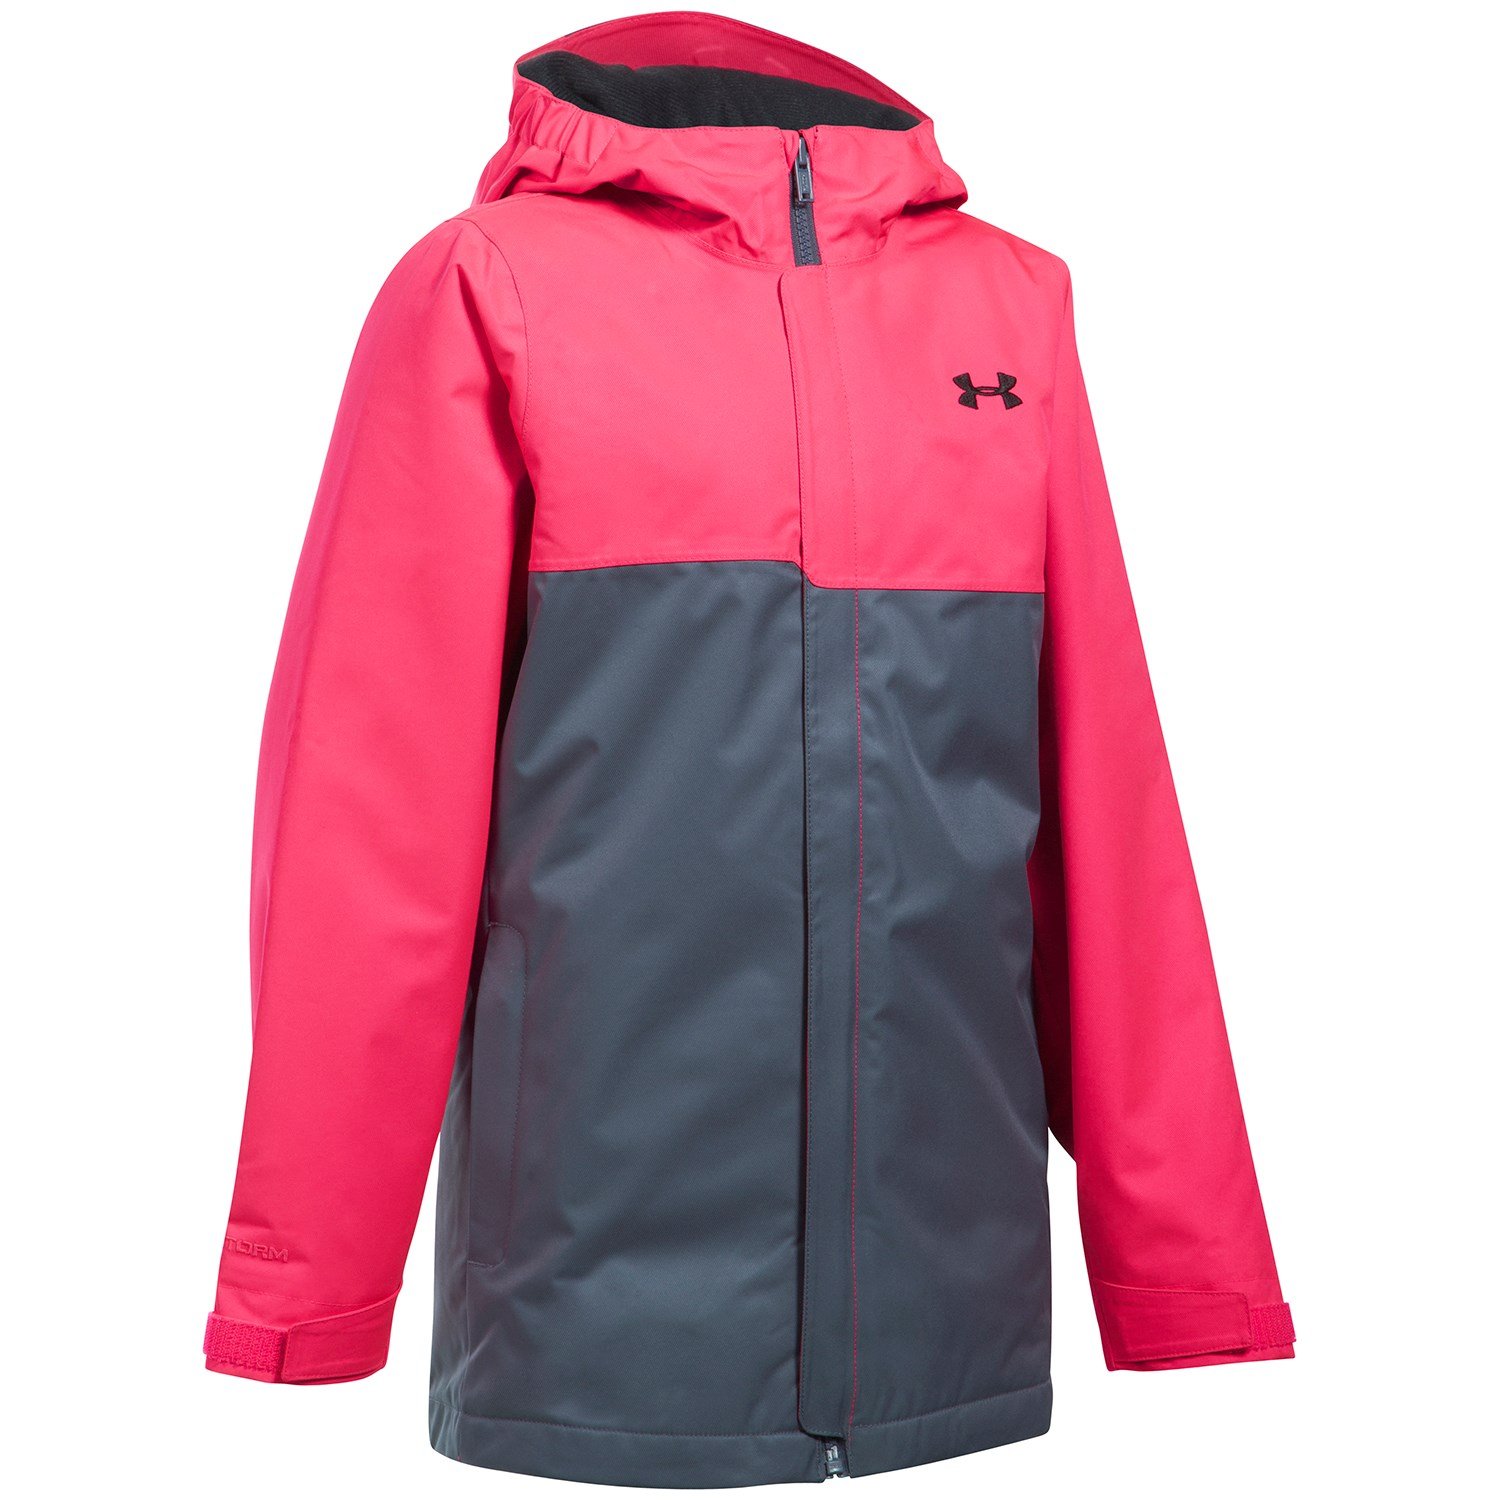 Under Armour Youth Hoodie Size Chart